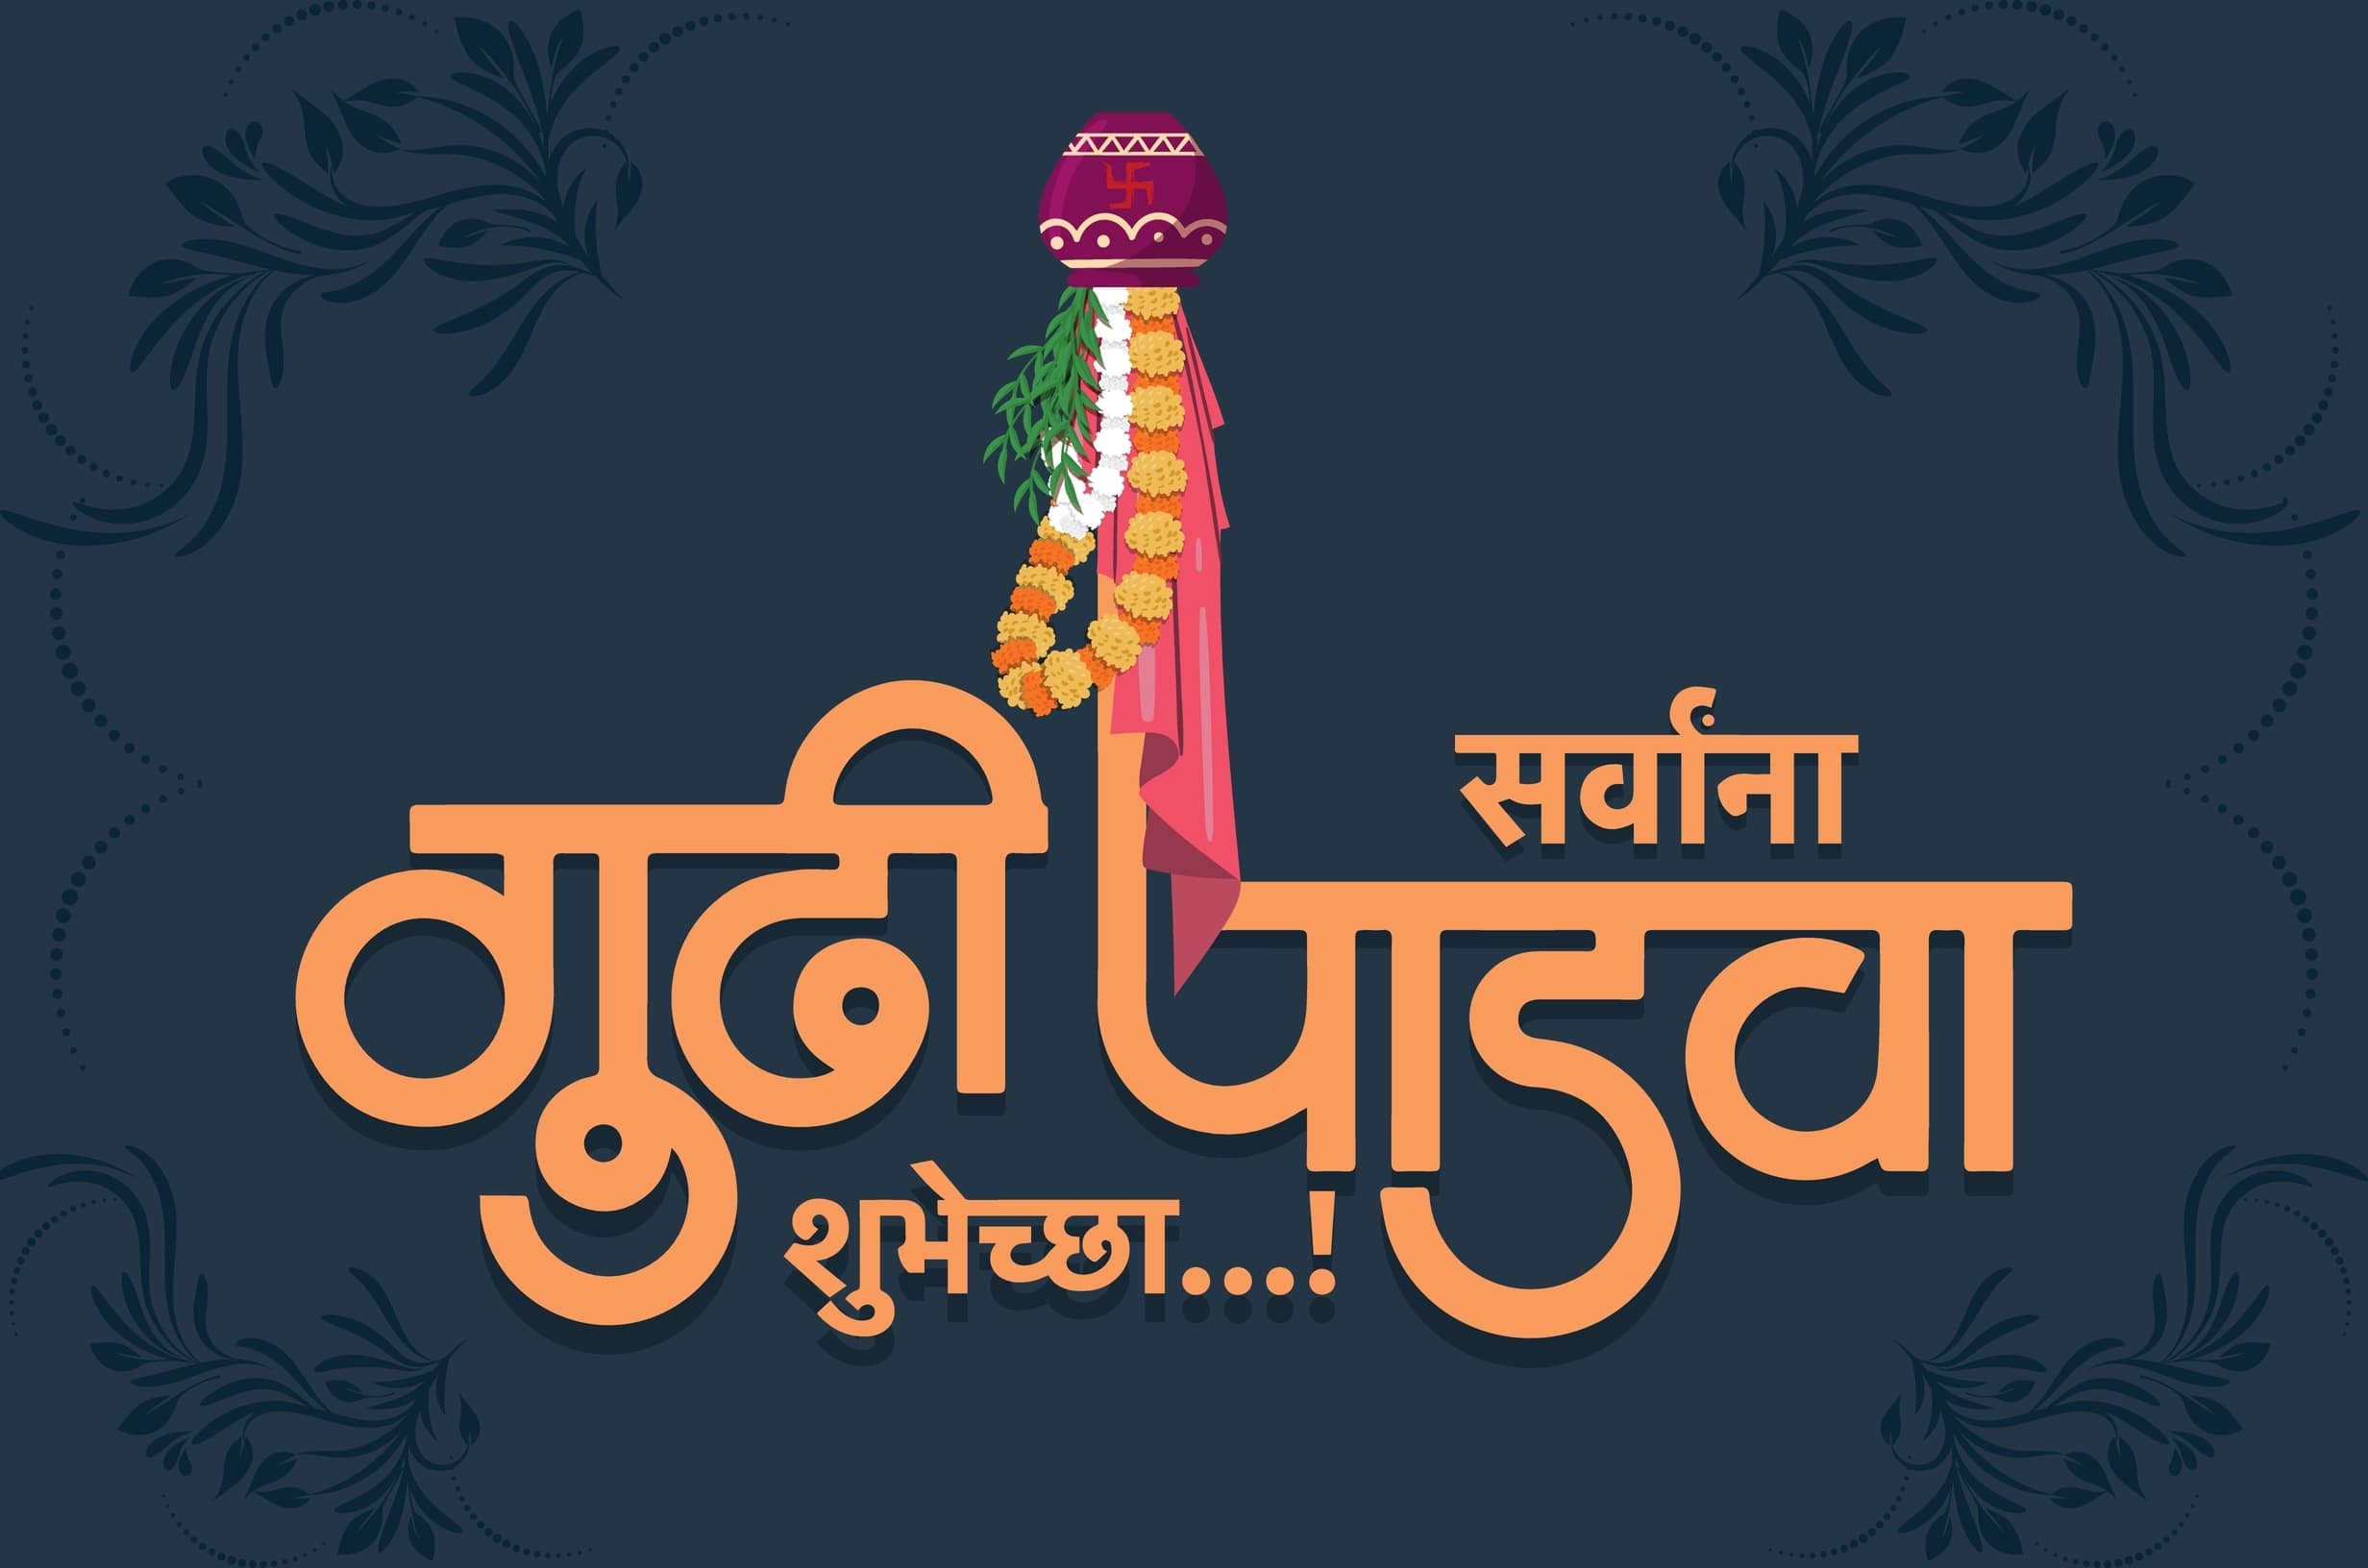 Happy Gudi Padwa 2022 Wishes, Images, Status, Quotes, Messages and